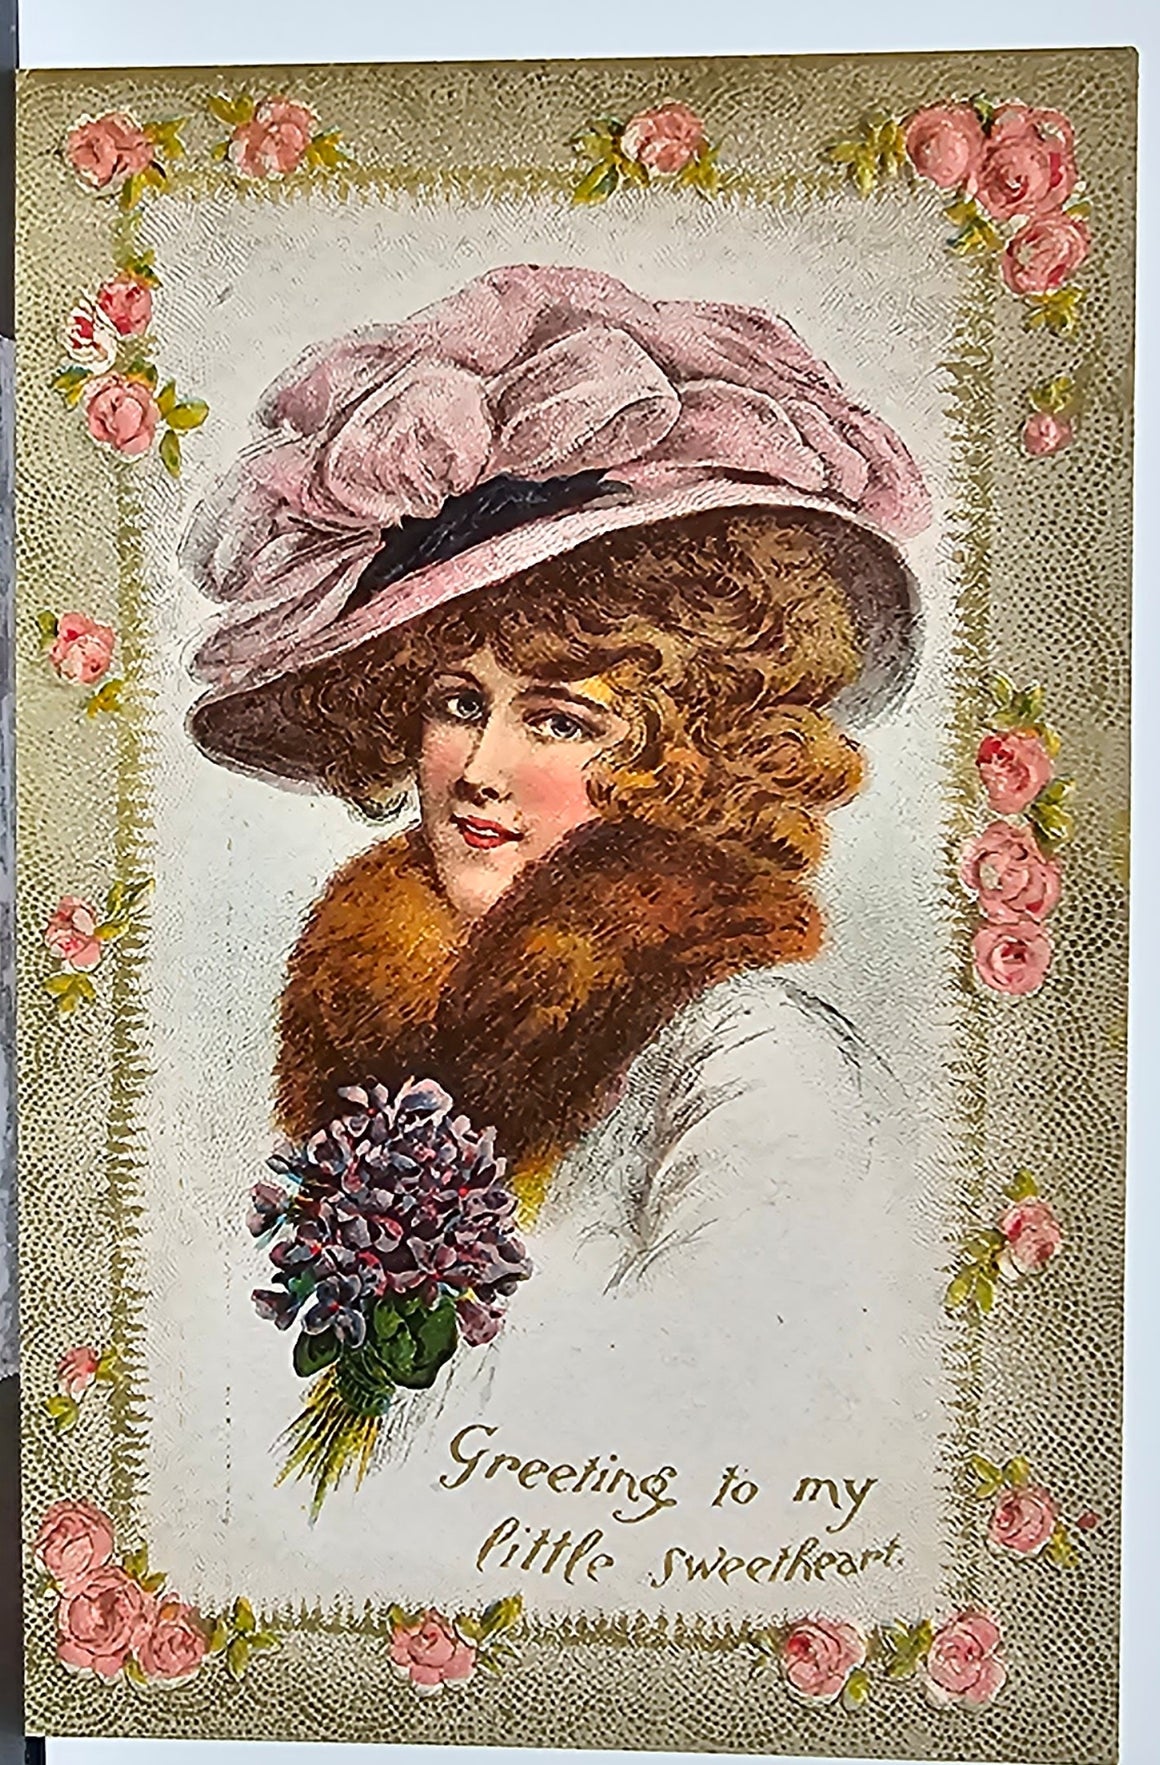 Valentine Postcard Woman Holding Flowers Wearing Hat Pink Floral Border Embossed Card Greetings My Little Sweetheart